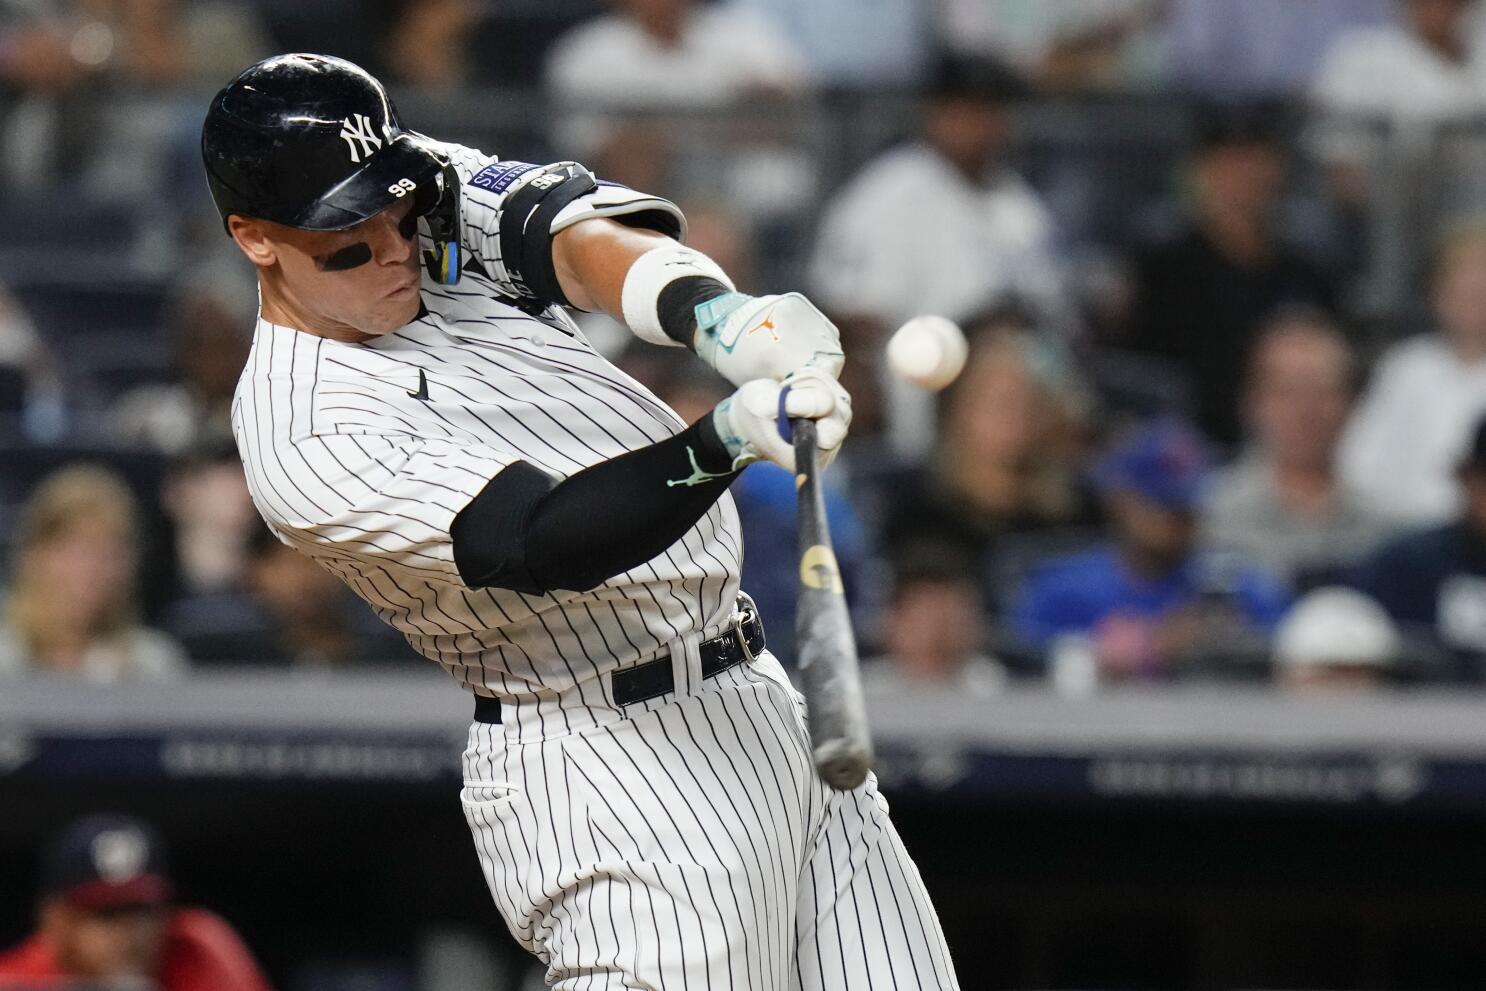 D. None of the Above: What would I do if I gave up an historic Aaron Judge  homer?